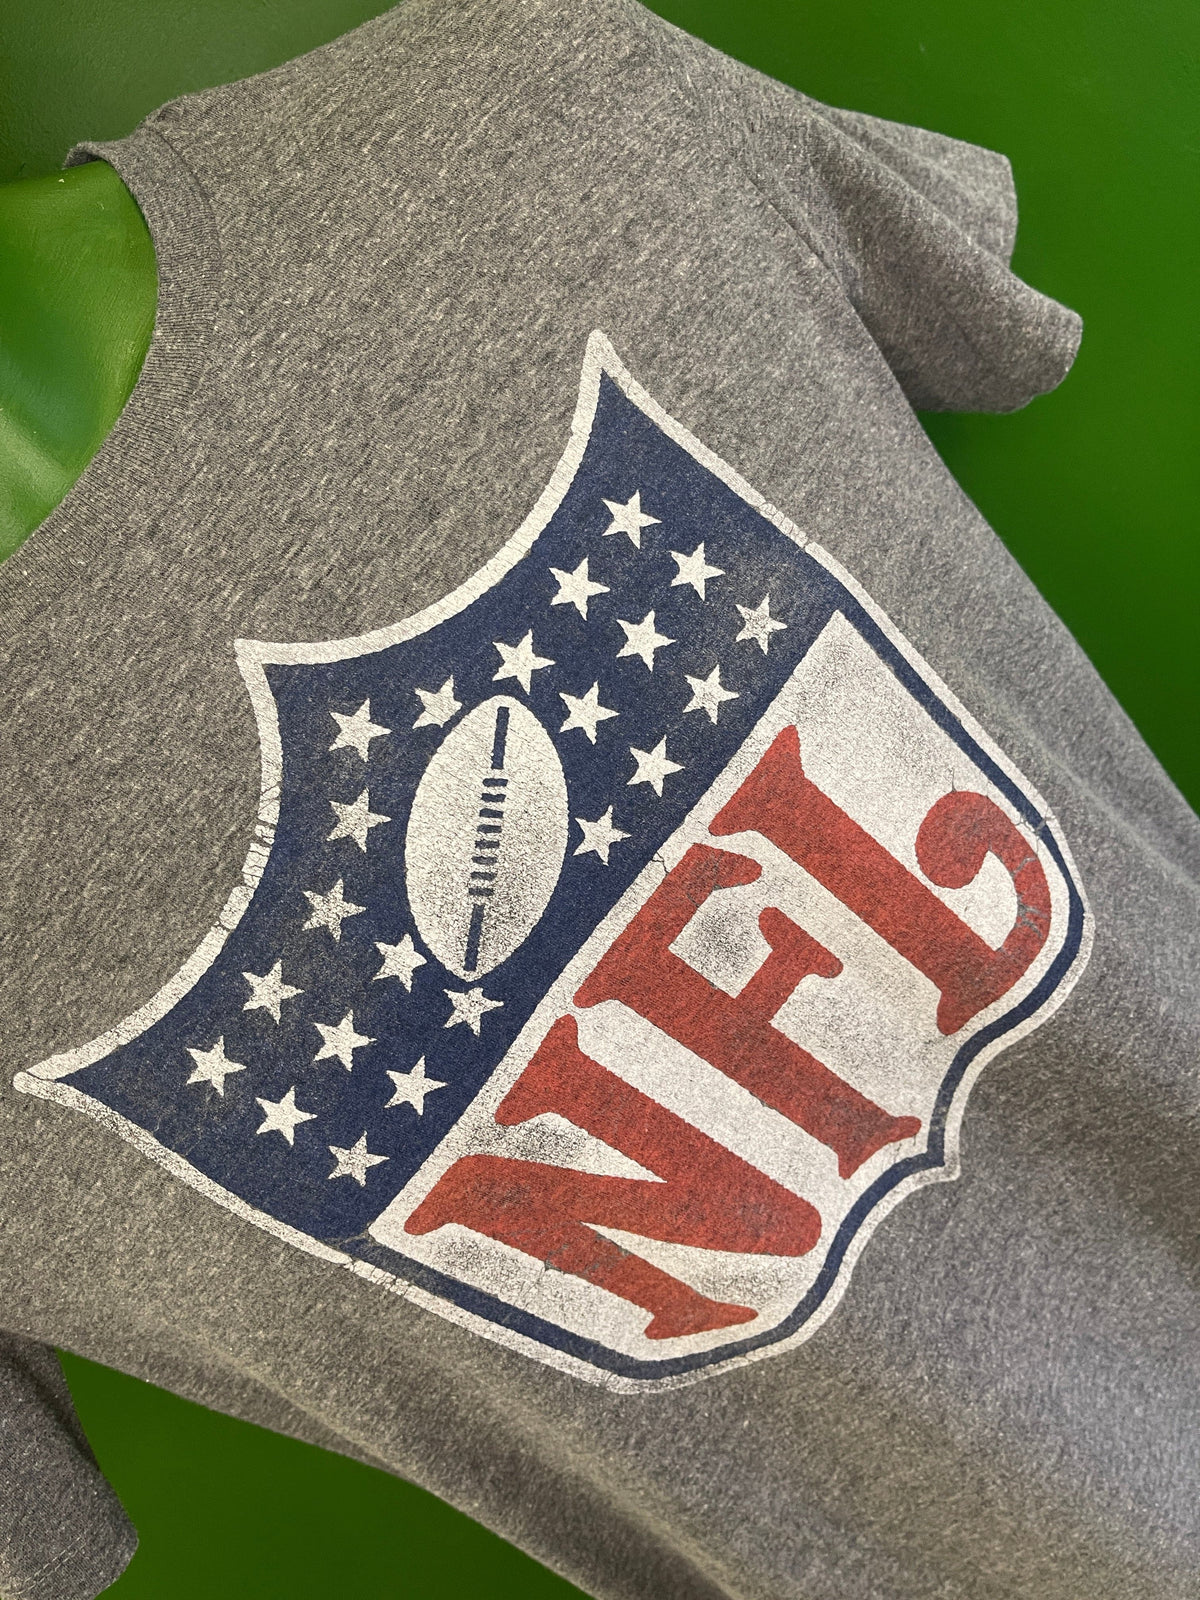 NFL Shield Graphic Heathered Grey T-Shirt Youth Large 14-16